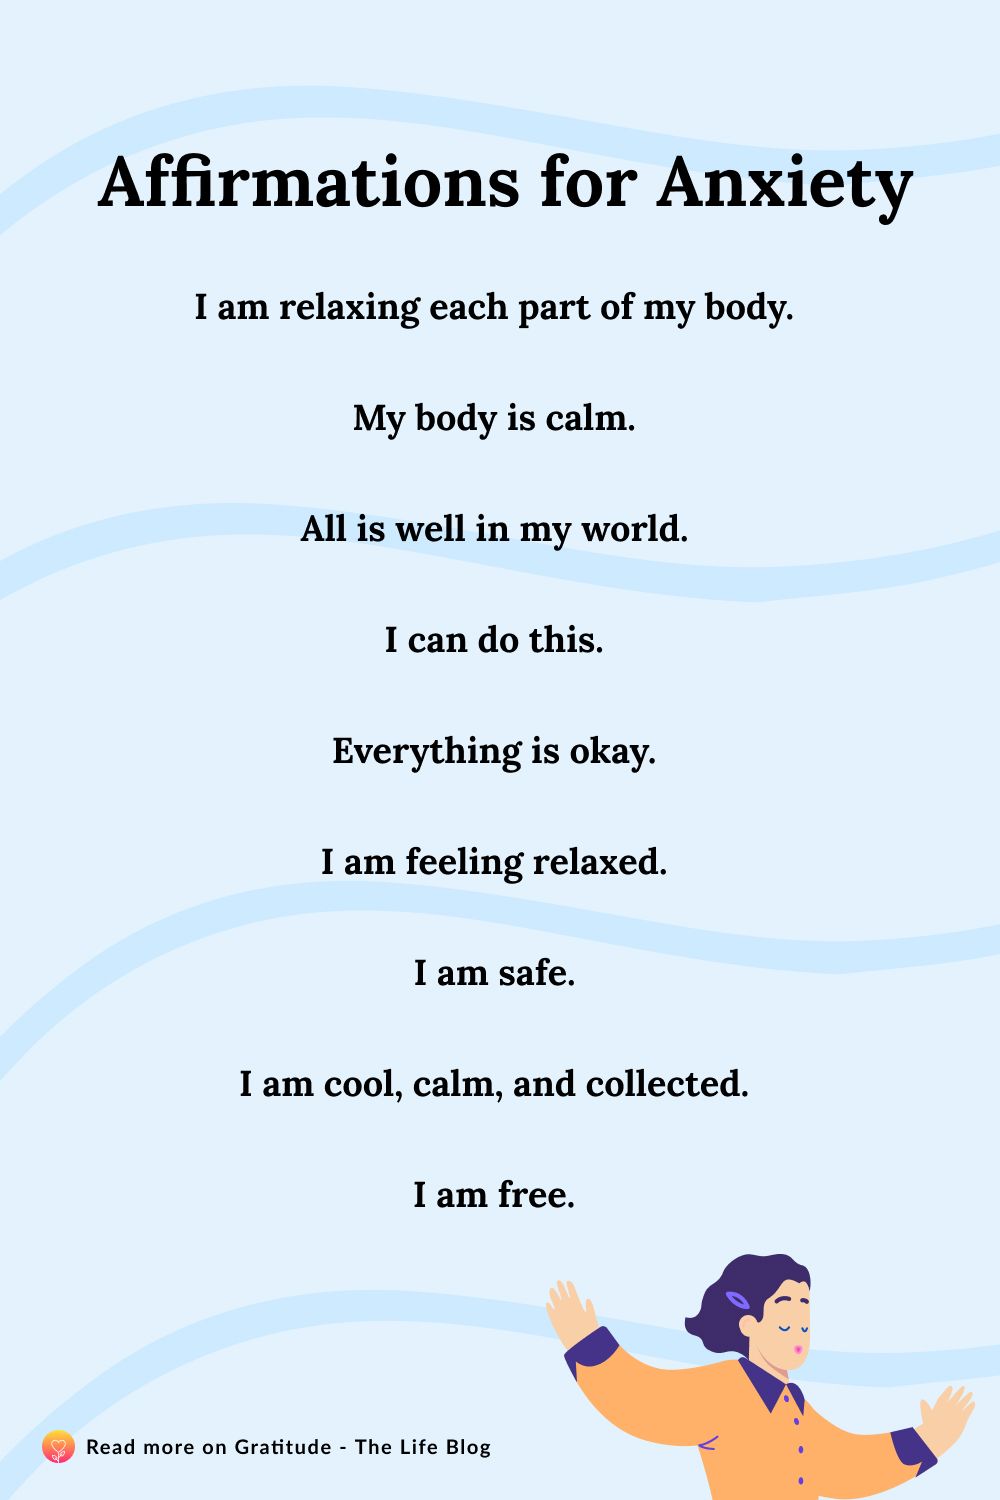 Image with list of affirmations for anxiety